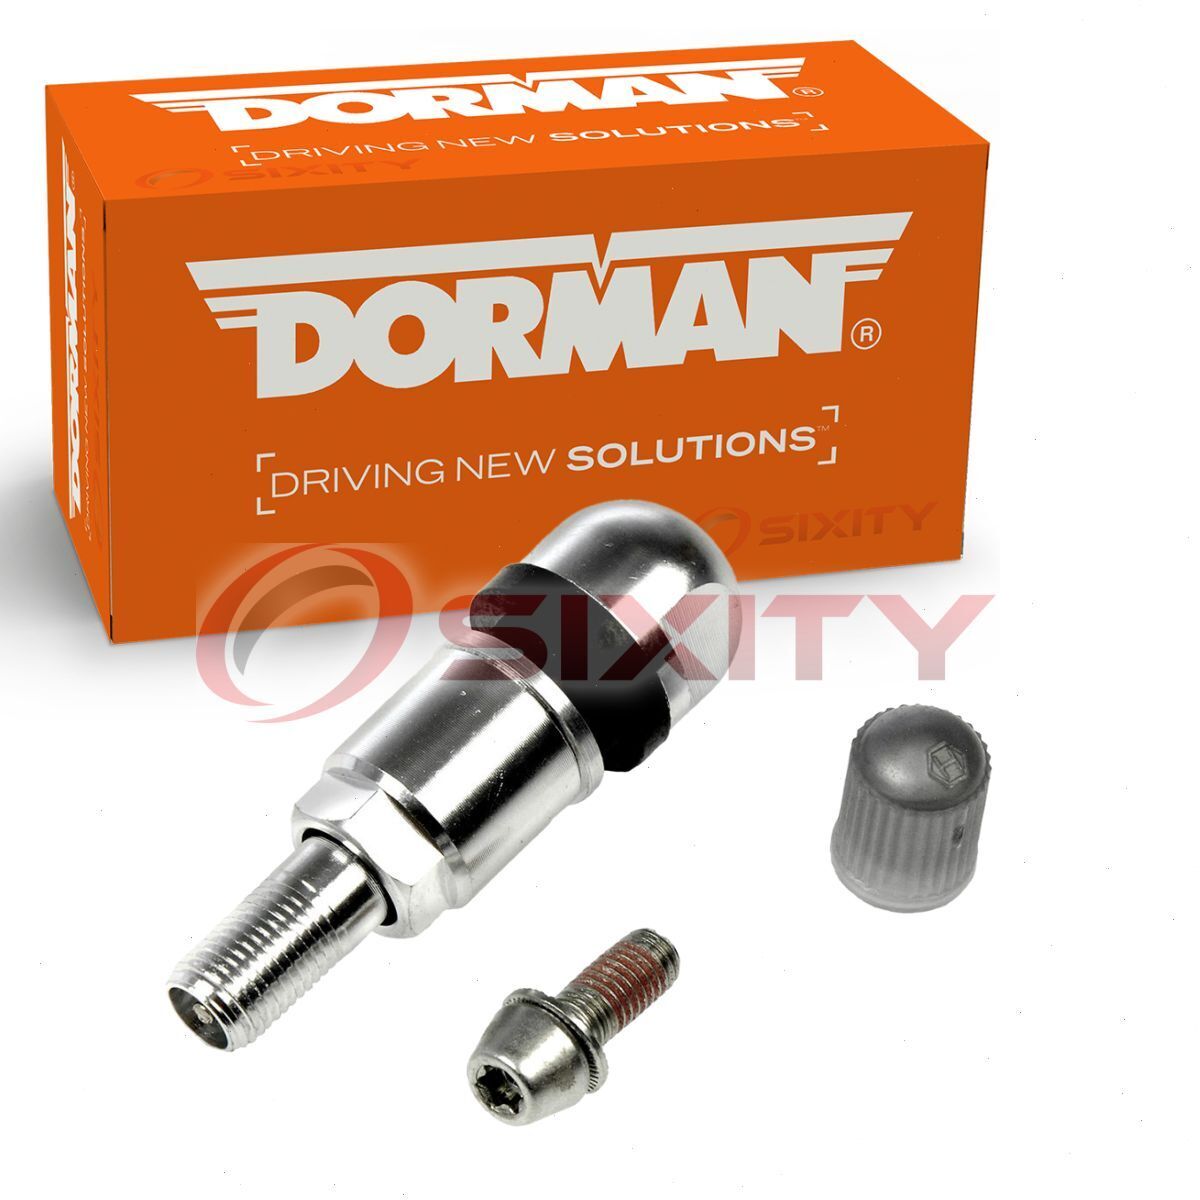 Dorman TPMS Valve Kit for 2003-2016 Ford Expedition Tire Pressure Monitoring zk